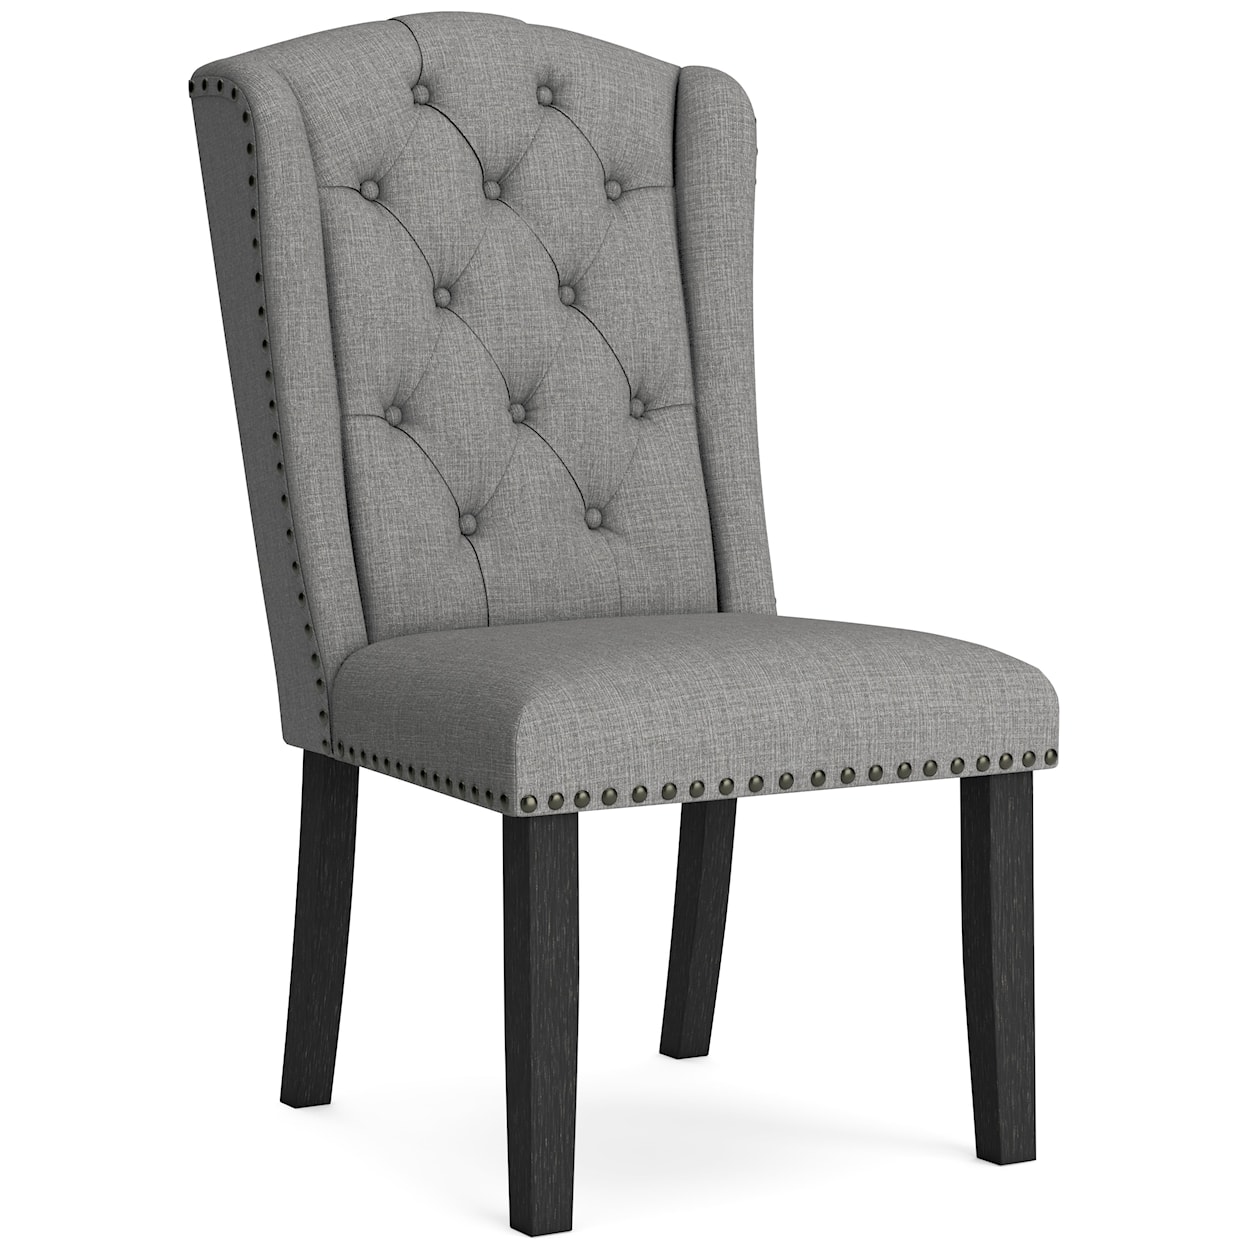 Benchcraft Jeanette Dining Chair